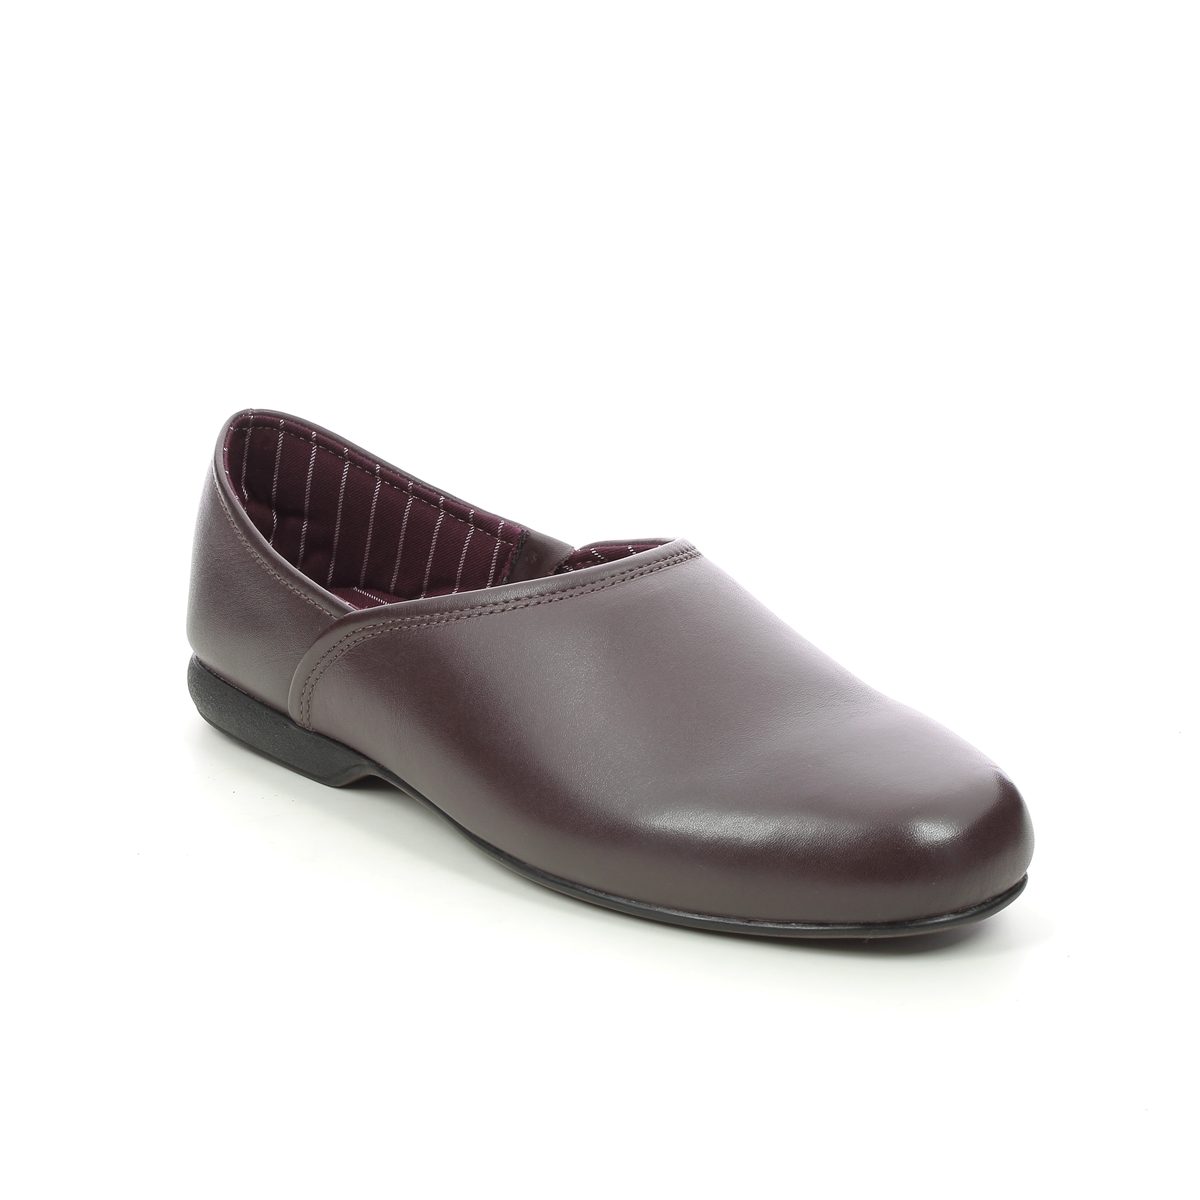 Clarks Harston Elite Burgundy Leather Mens Slippers 447217G In Size 7 In Plain Burgundy Leather G Width Fitting